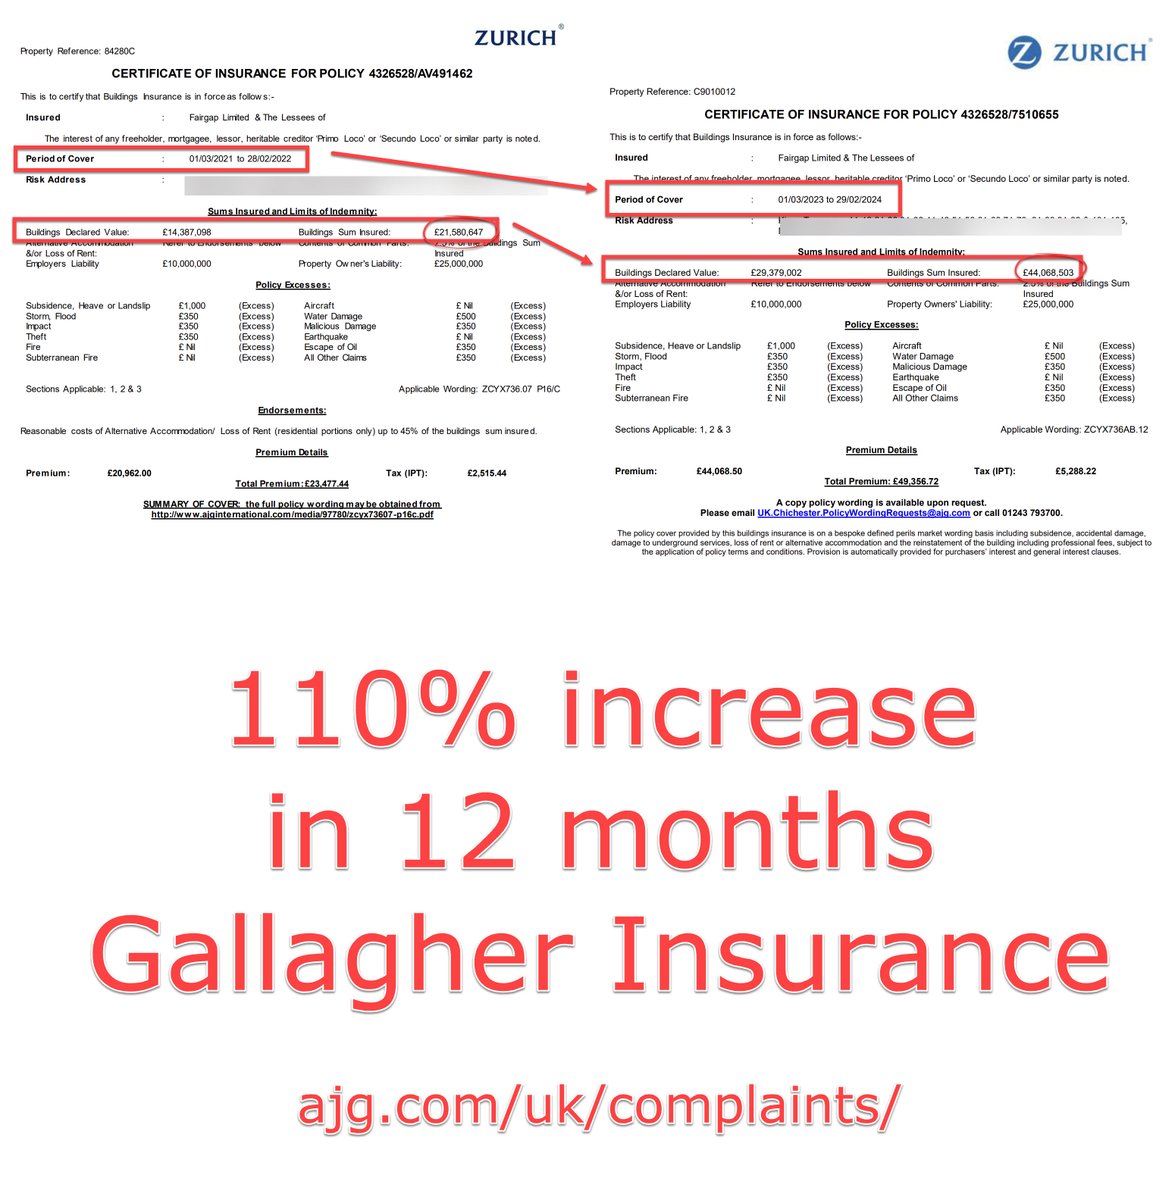 FirstPort 'management fee' on a relatively small block in Chelmsford for 6 months!

#Leasehold really is a Cesspit of corruption! @GallagherUK < @Zurich

#FreeLeaseholders | #LeaseholdScandal | #FirstPort | #Fleecehold